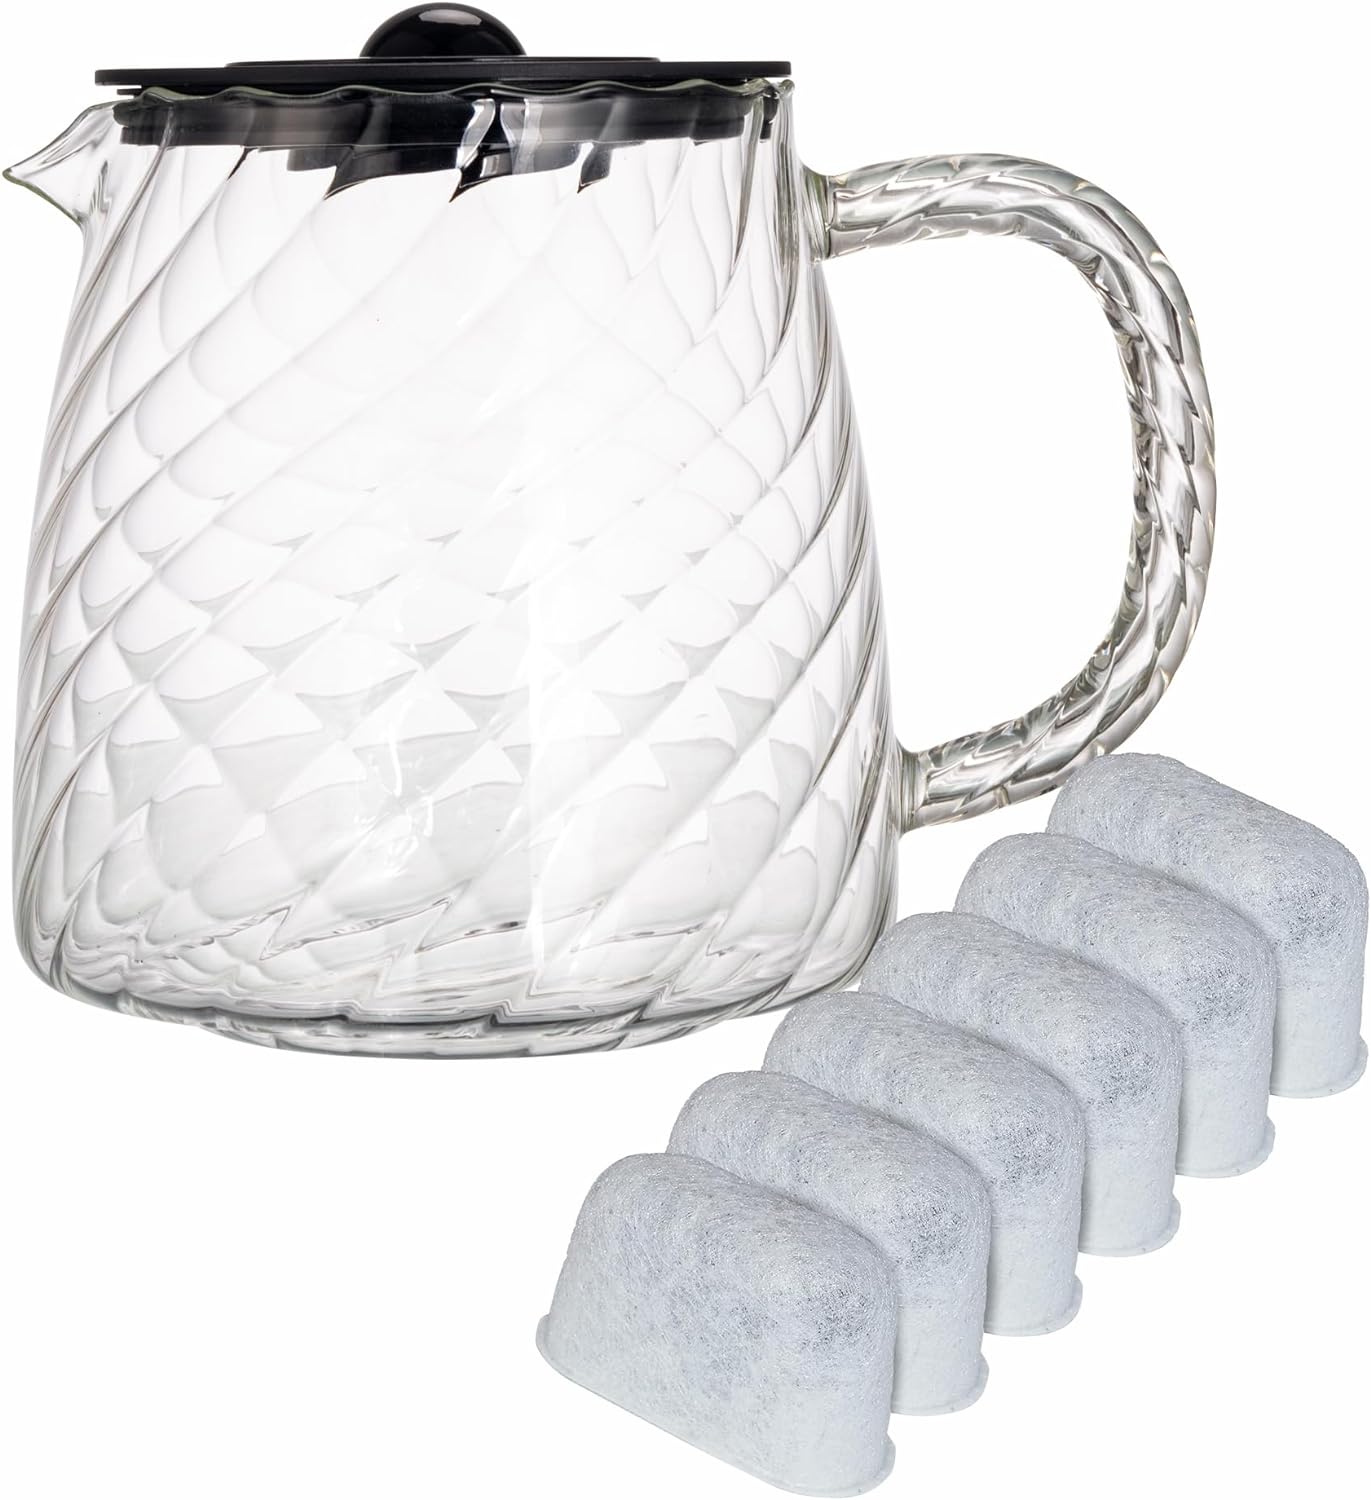 I used this to replace a cuisinart pitcher that I broke. This one is prettier, works well, and easily cleans in the dishwasher. I would buy it again.